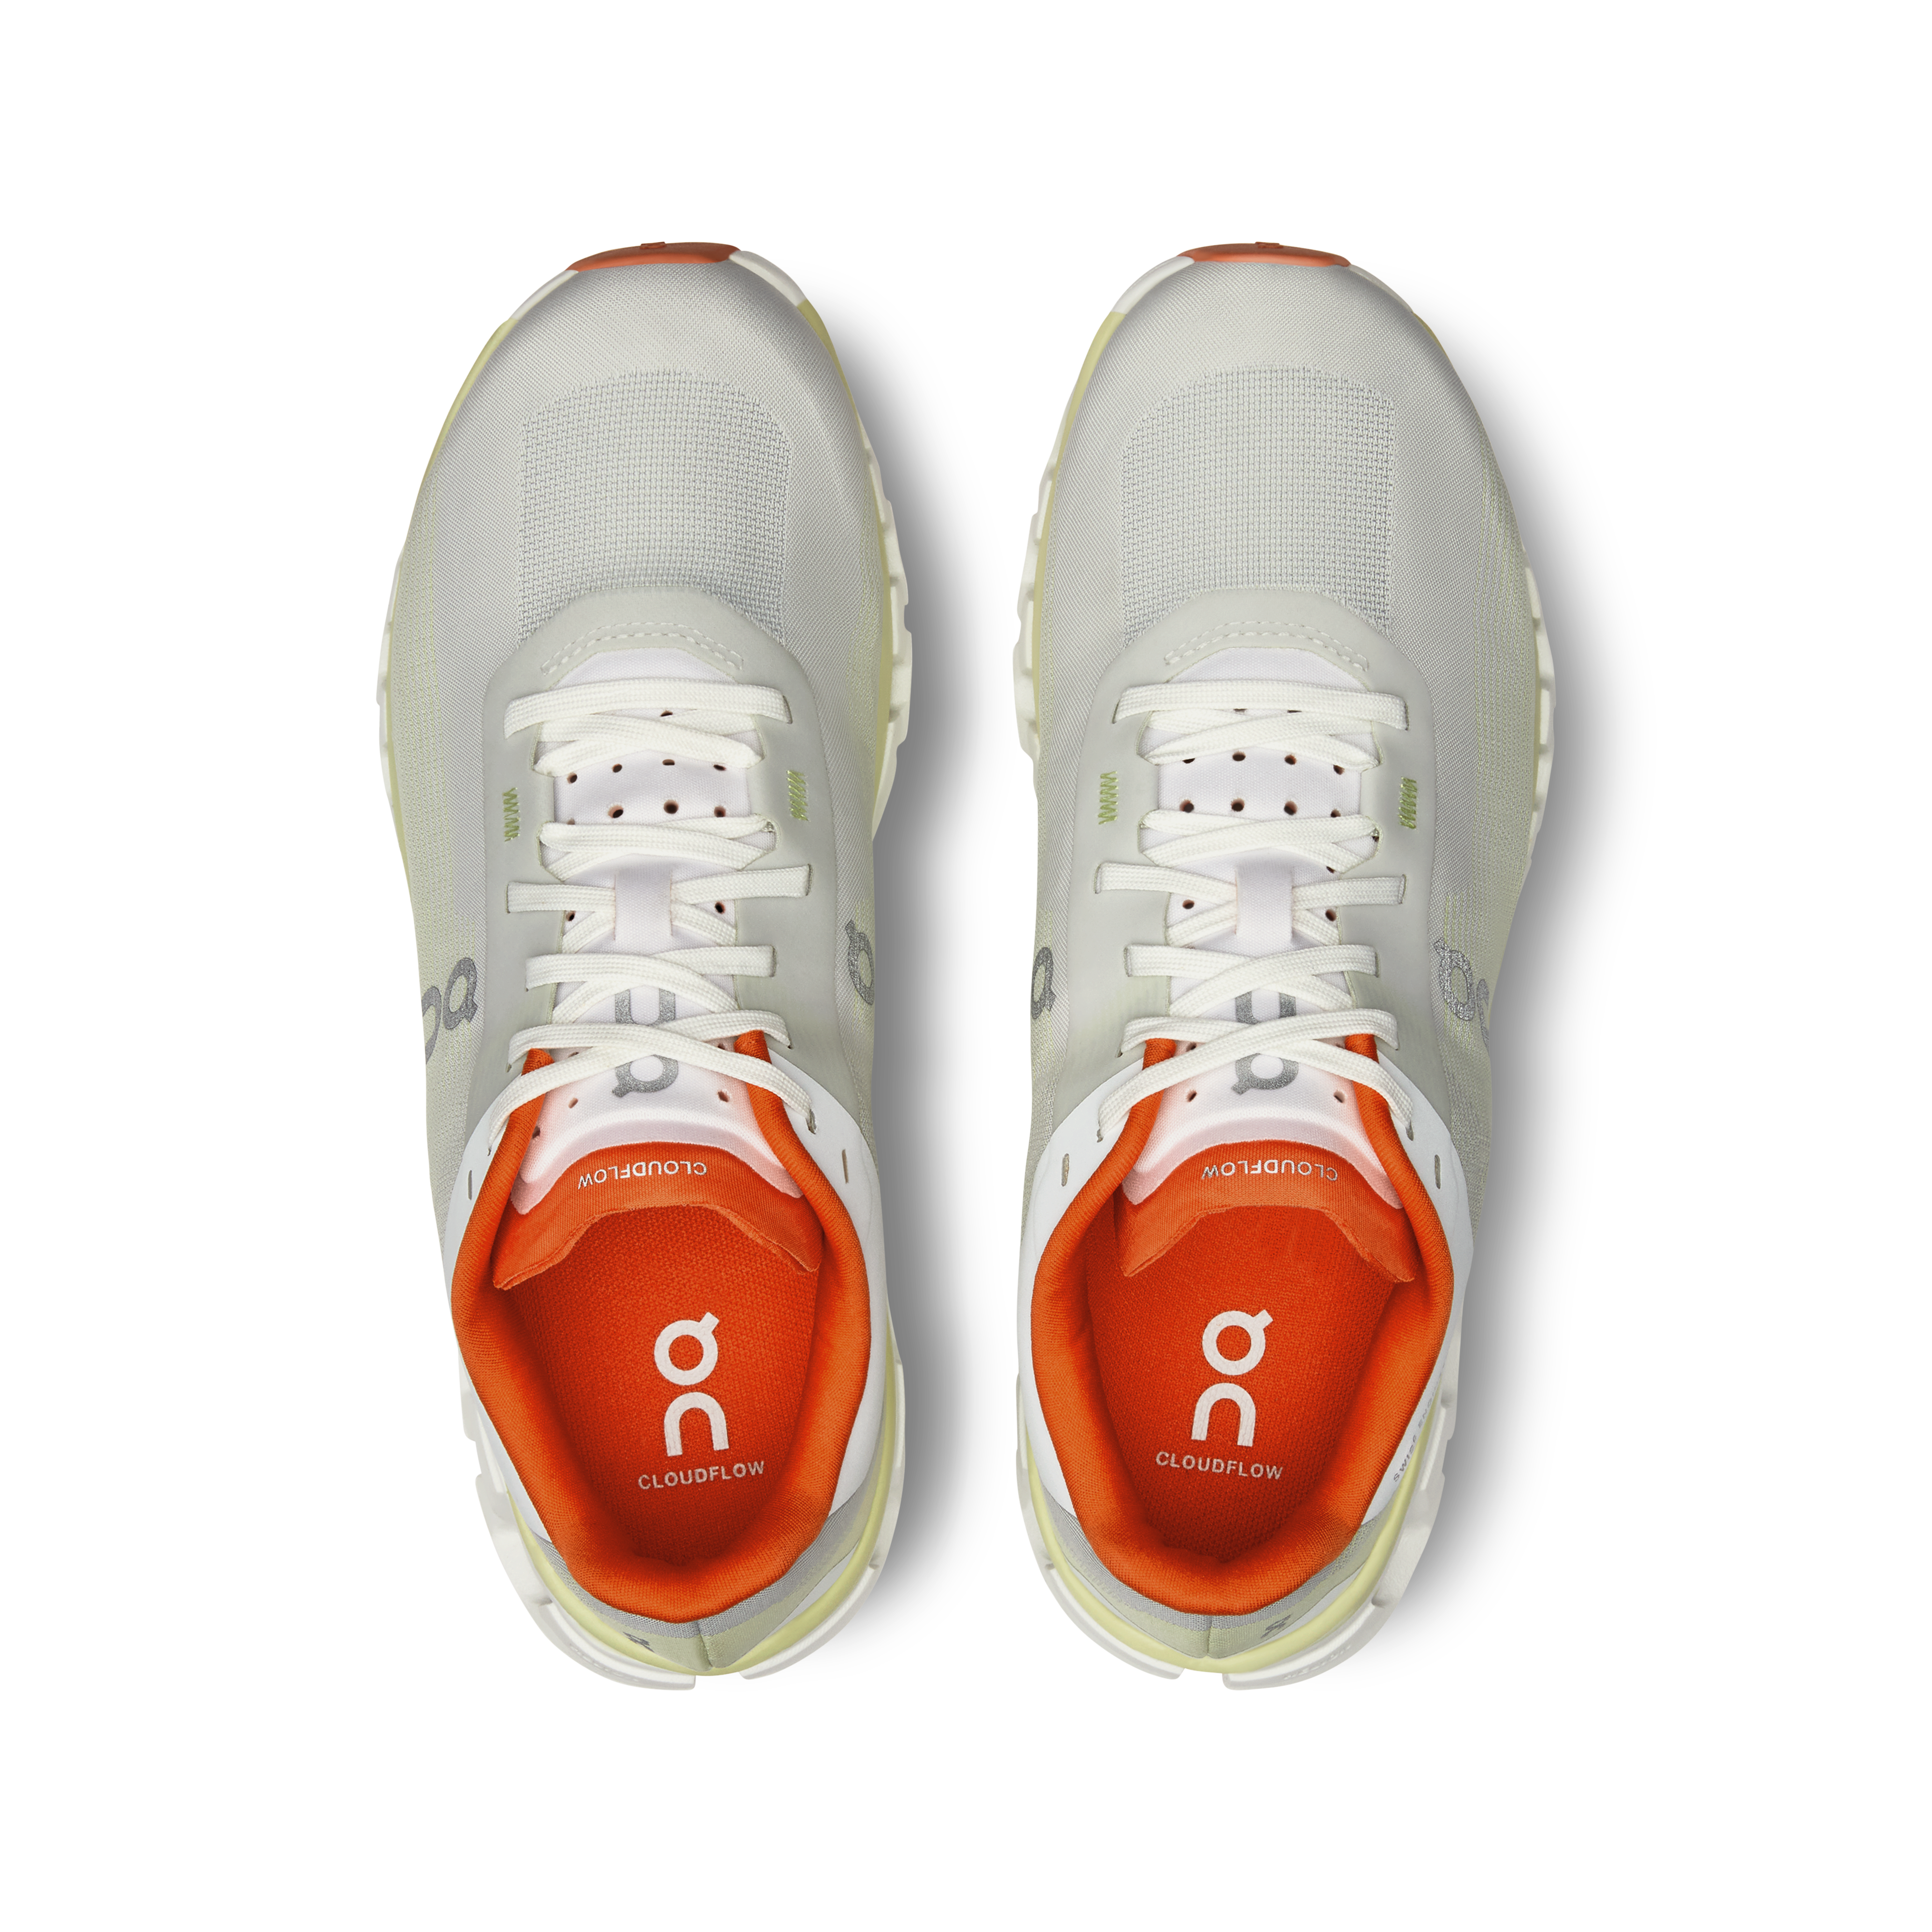 On Cloudflow 4 Women's Running Shoes White 3WD30110248